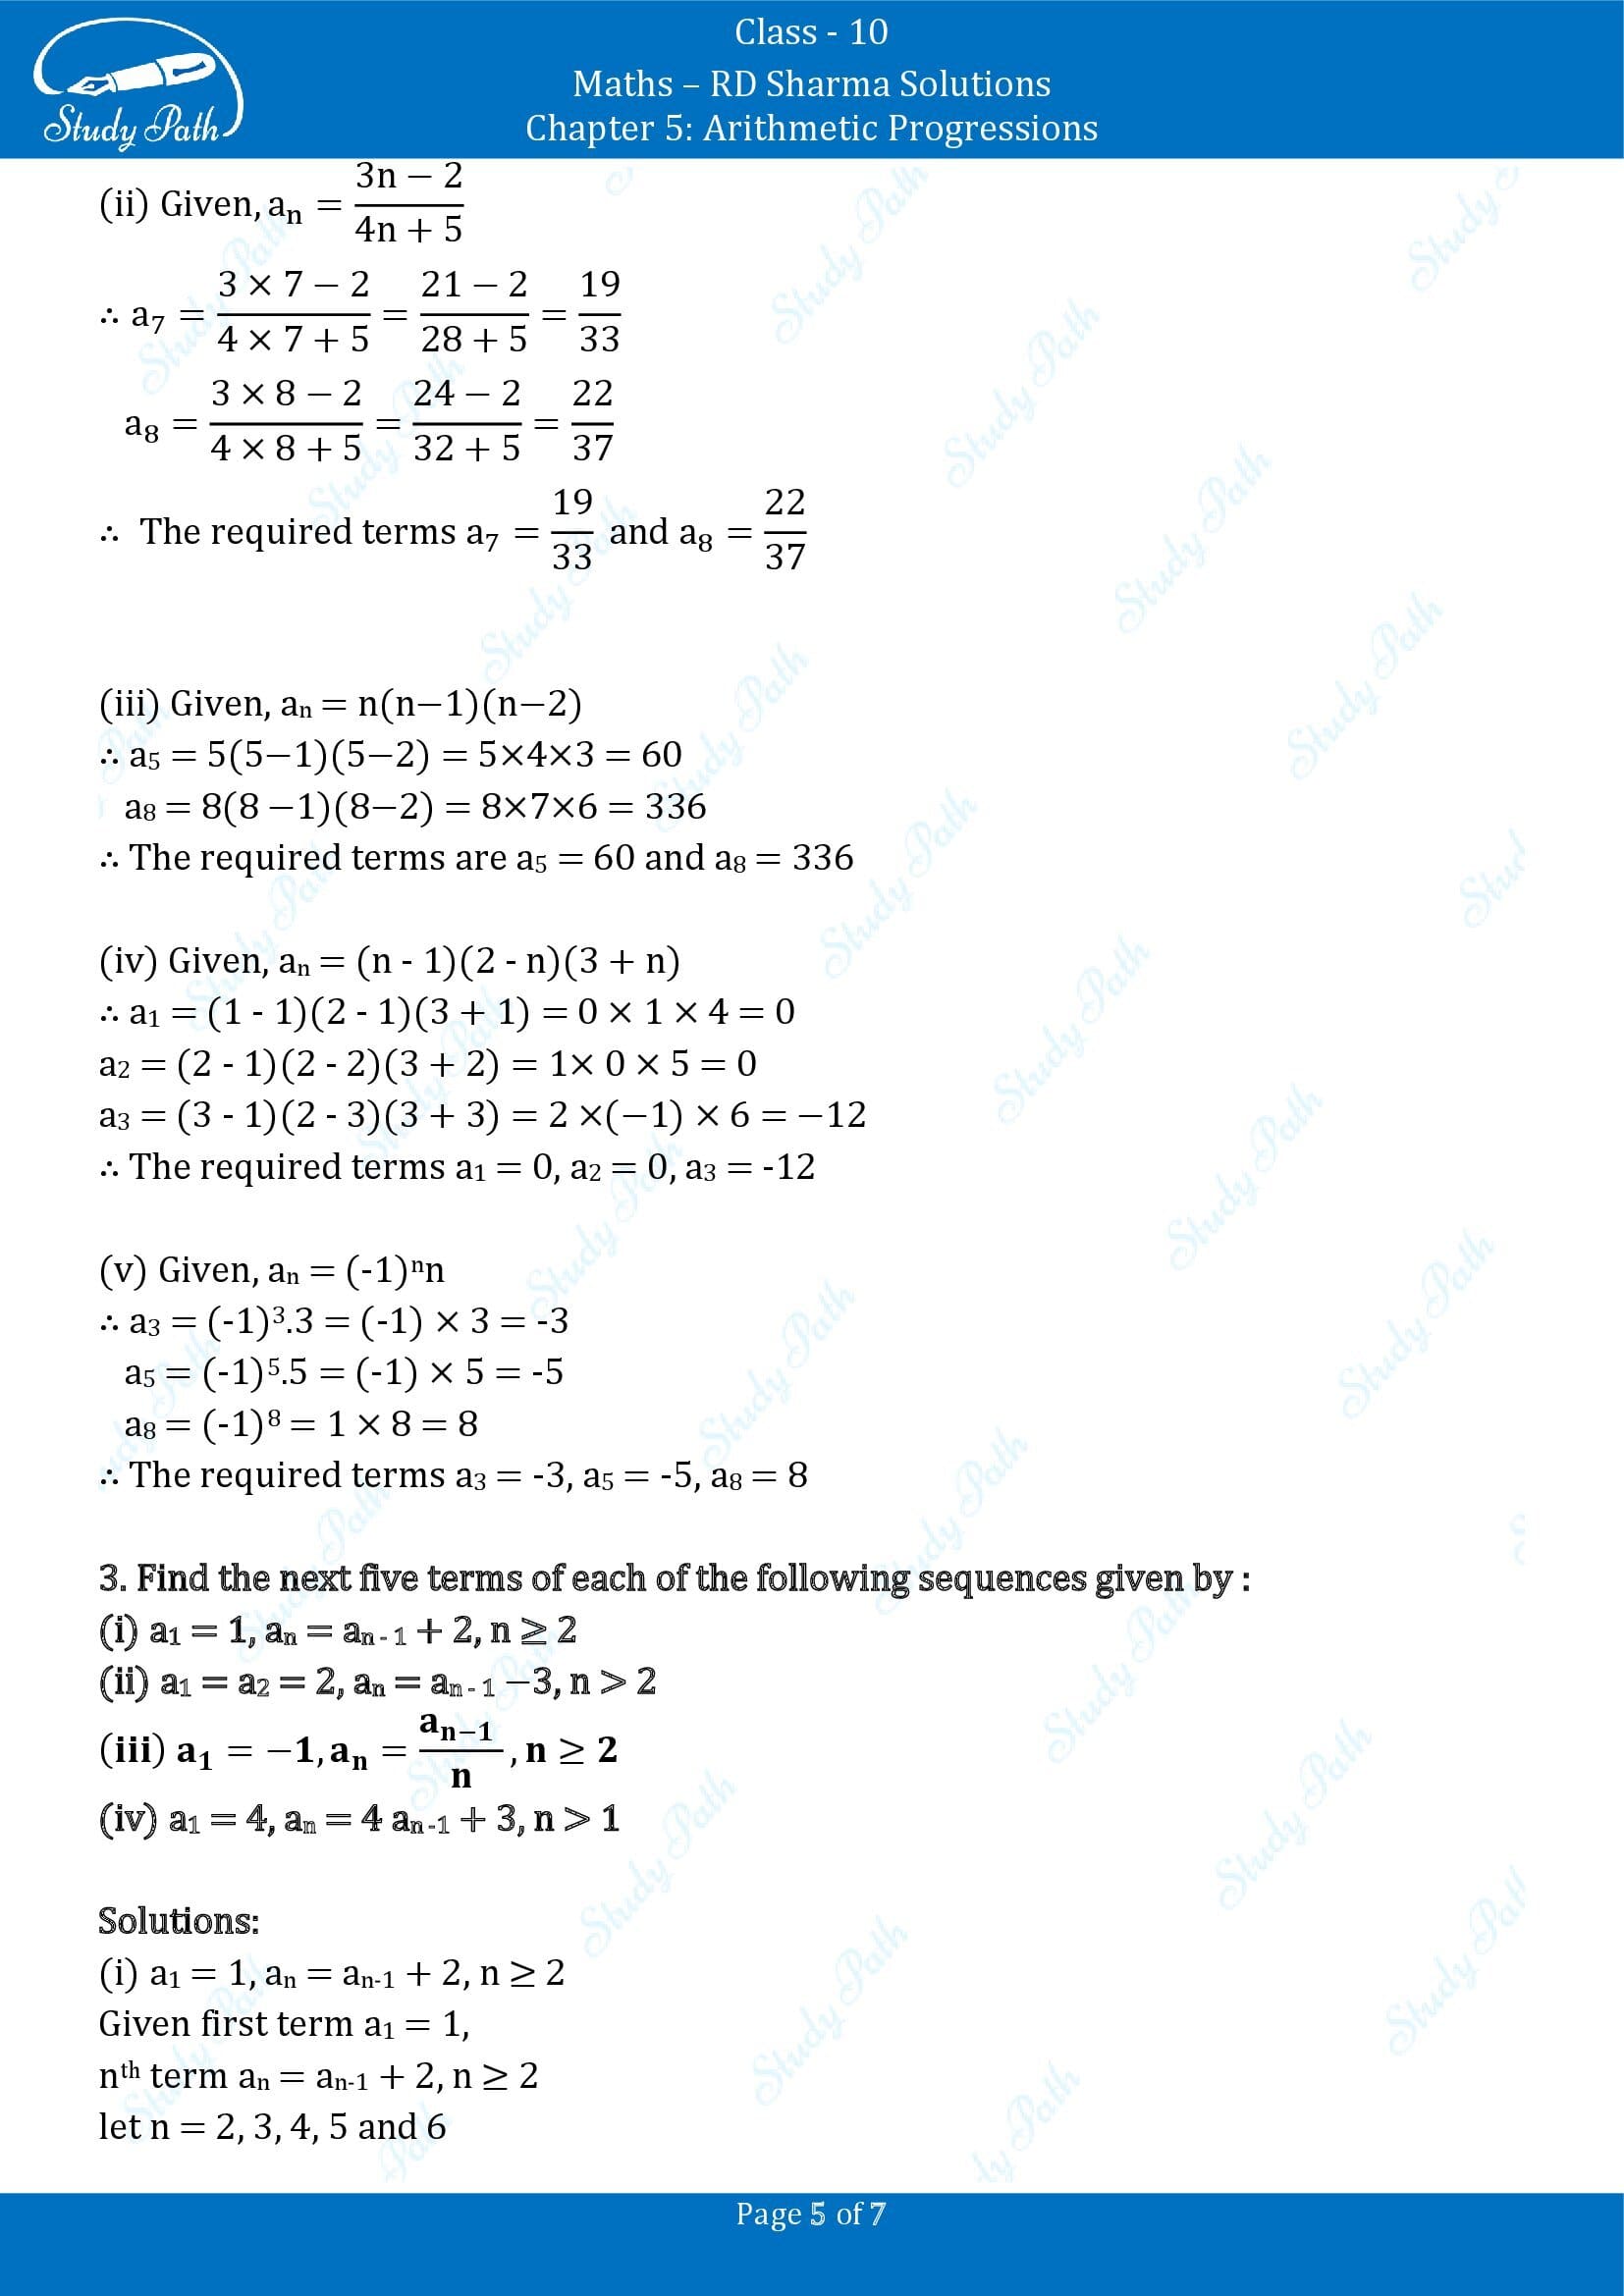 RD Sharma Solutions Class 10 Chapter 5 Arithmetic Progressions Exercise 5.1 00005